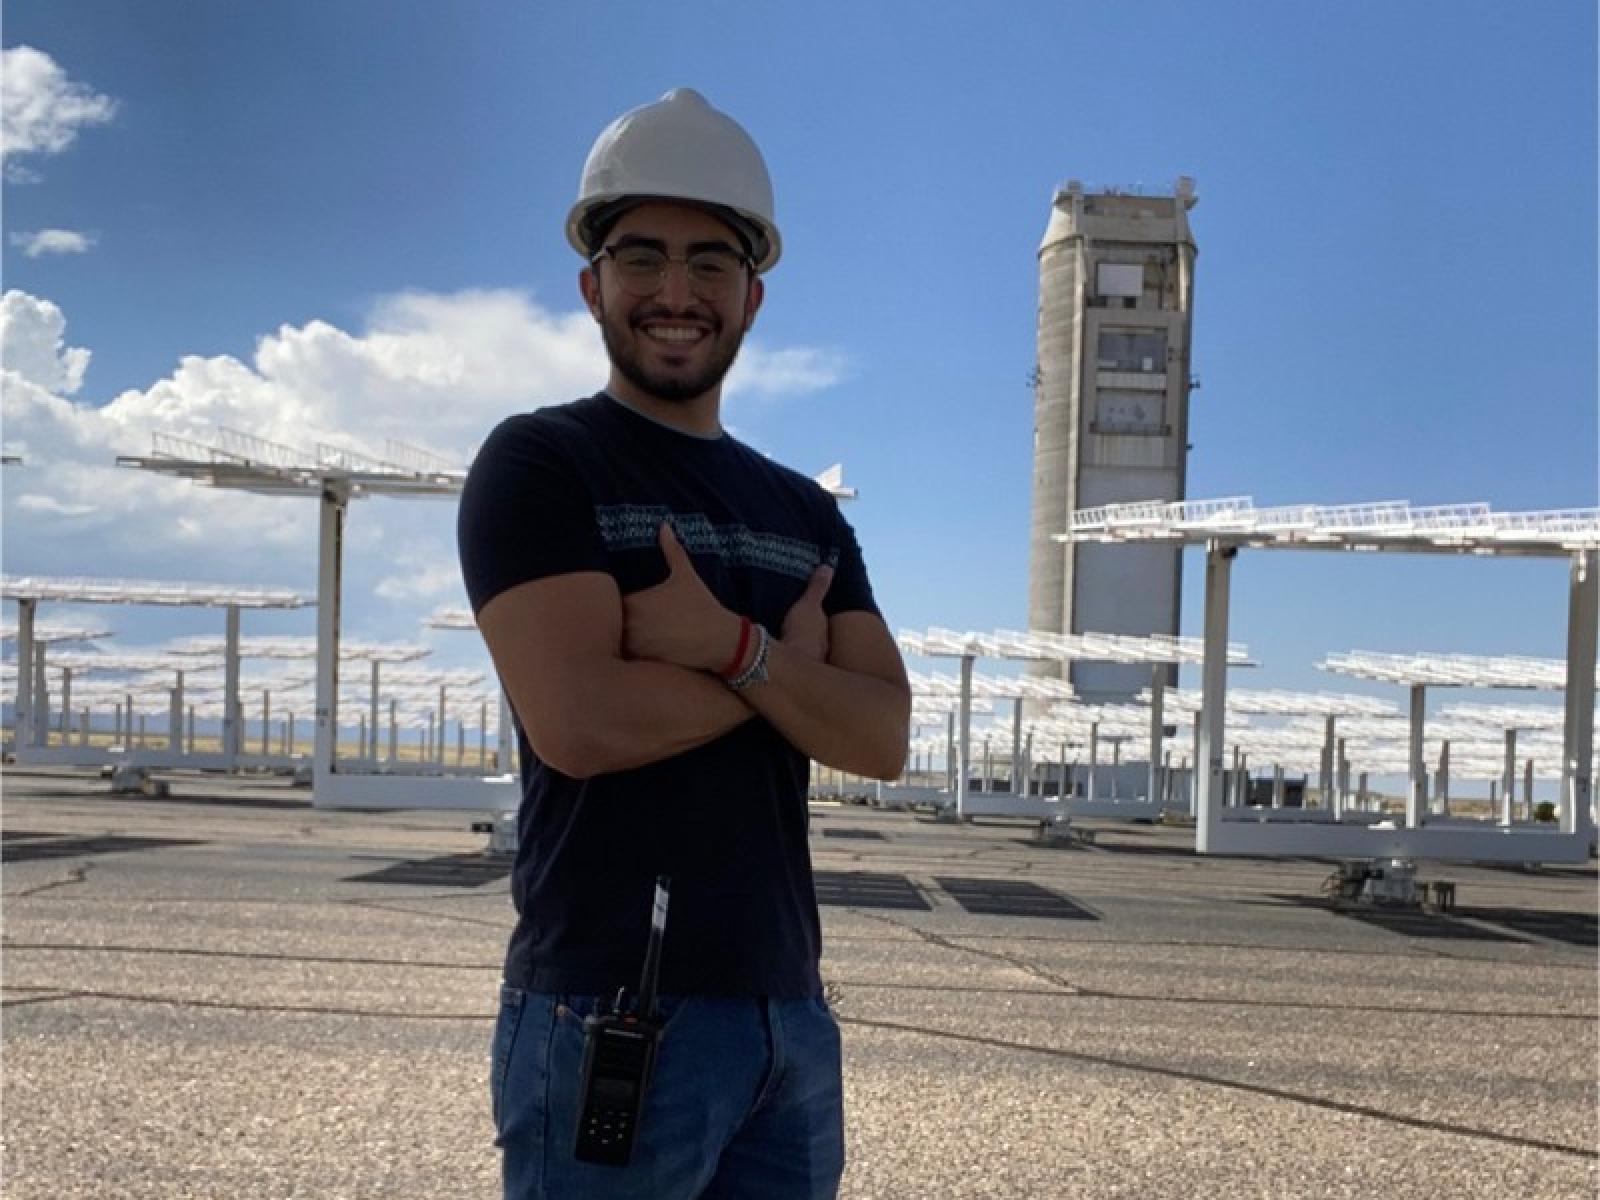 Cesar Moriel, a student from the University of Texas at El Paso, stands with his arms crossed, smiling, and wearing a hard hat.